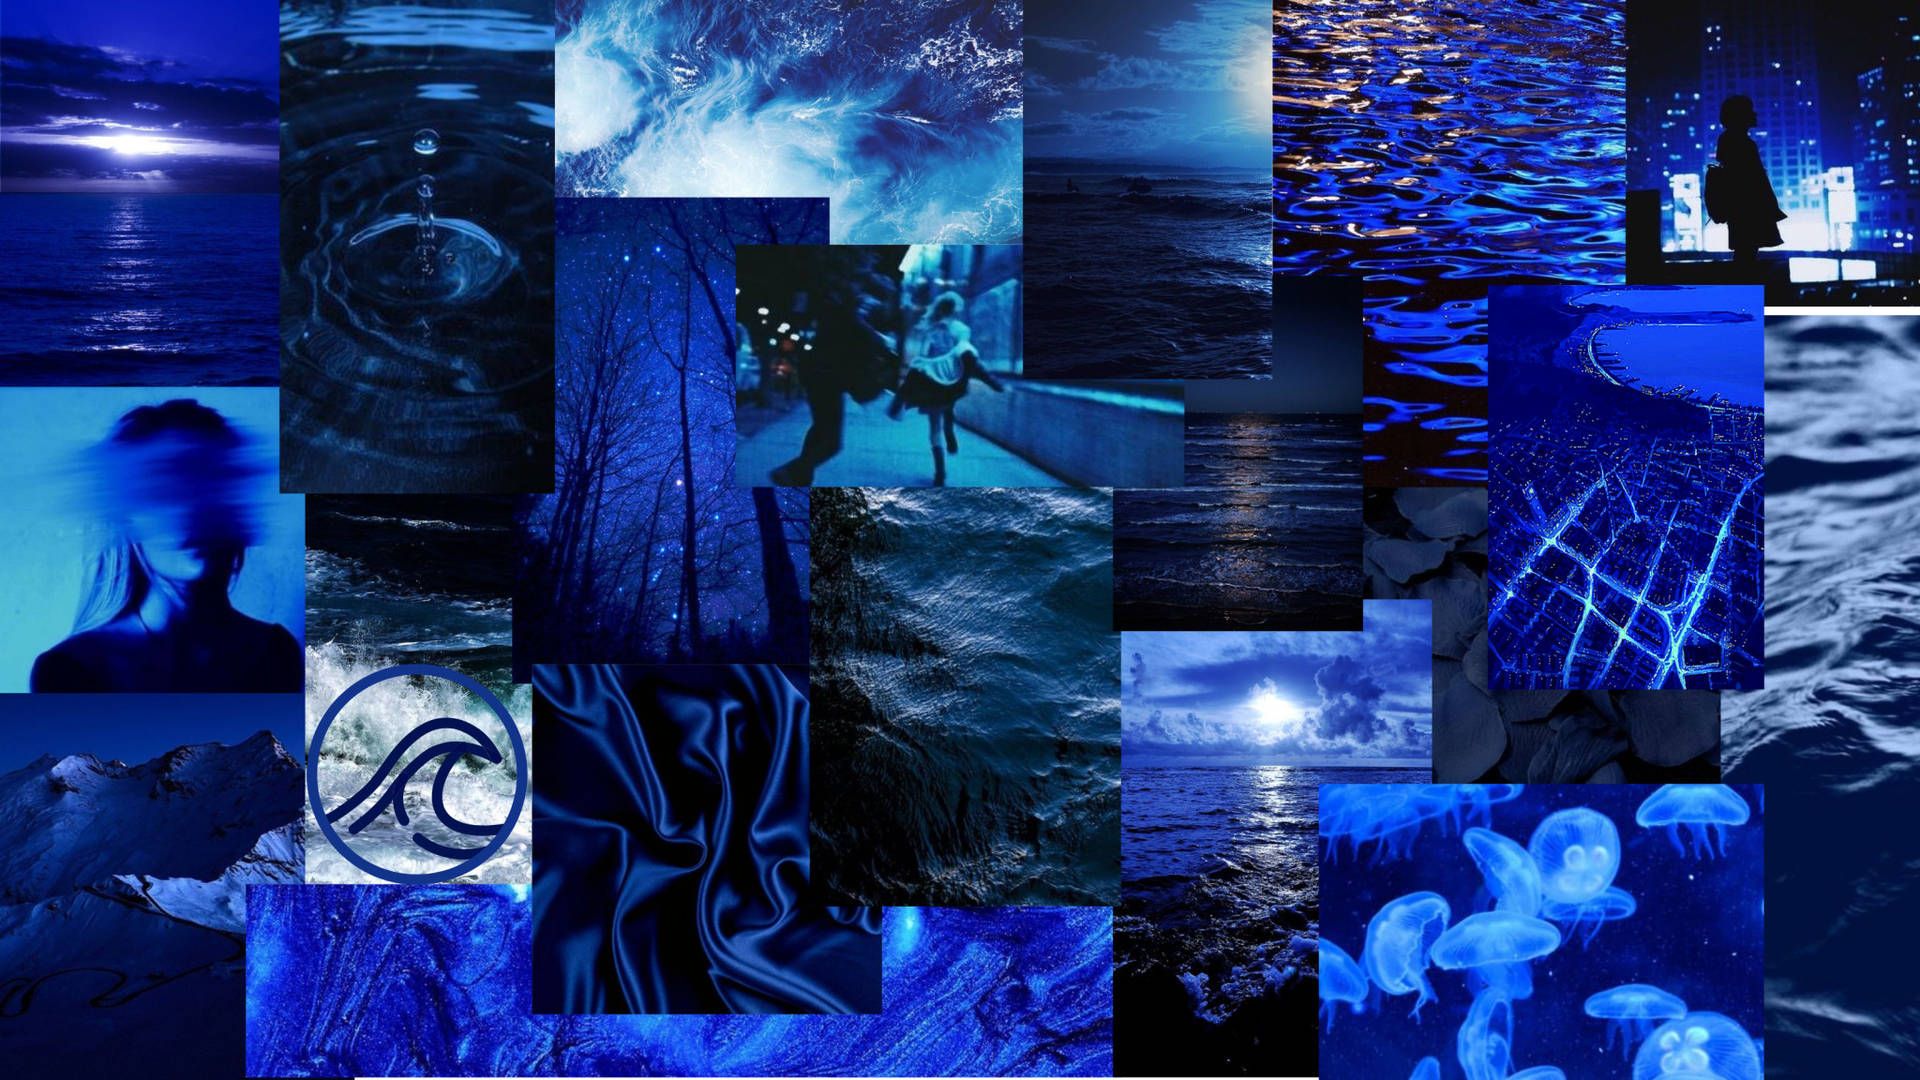 Blue aesthetic wallpaper, a collage of blue aesthetic pictures. - Dark blue, neon blue, navy blue, laptop